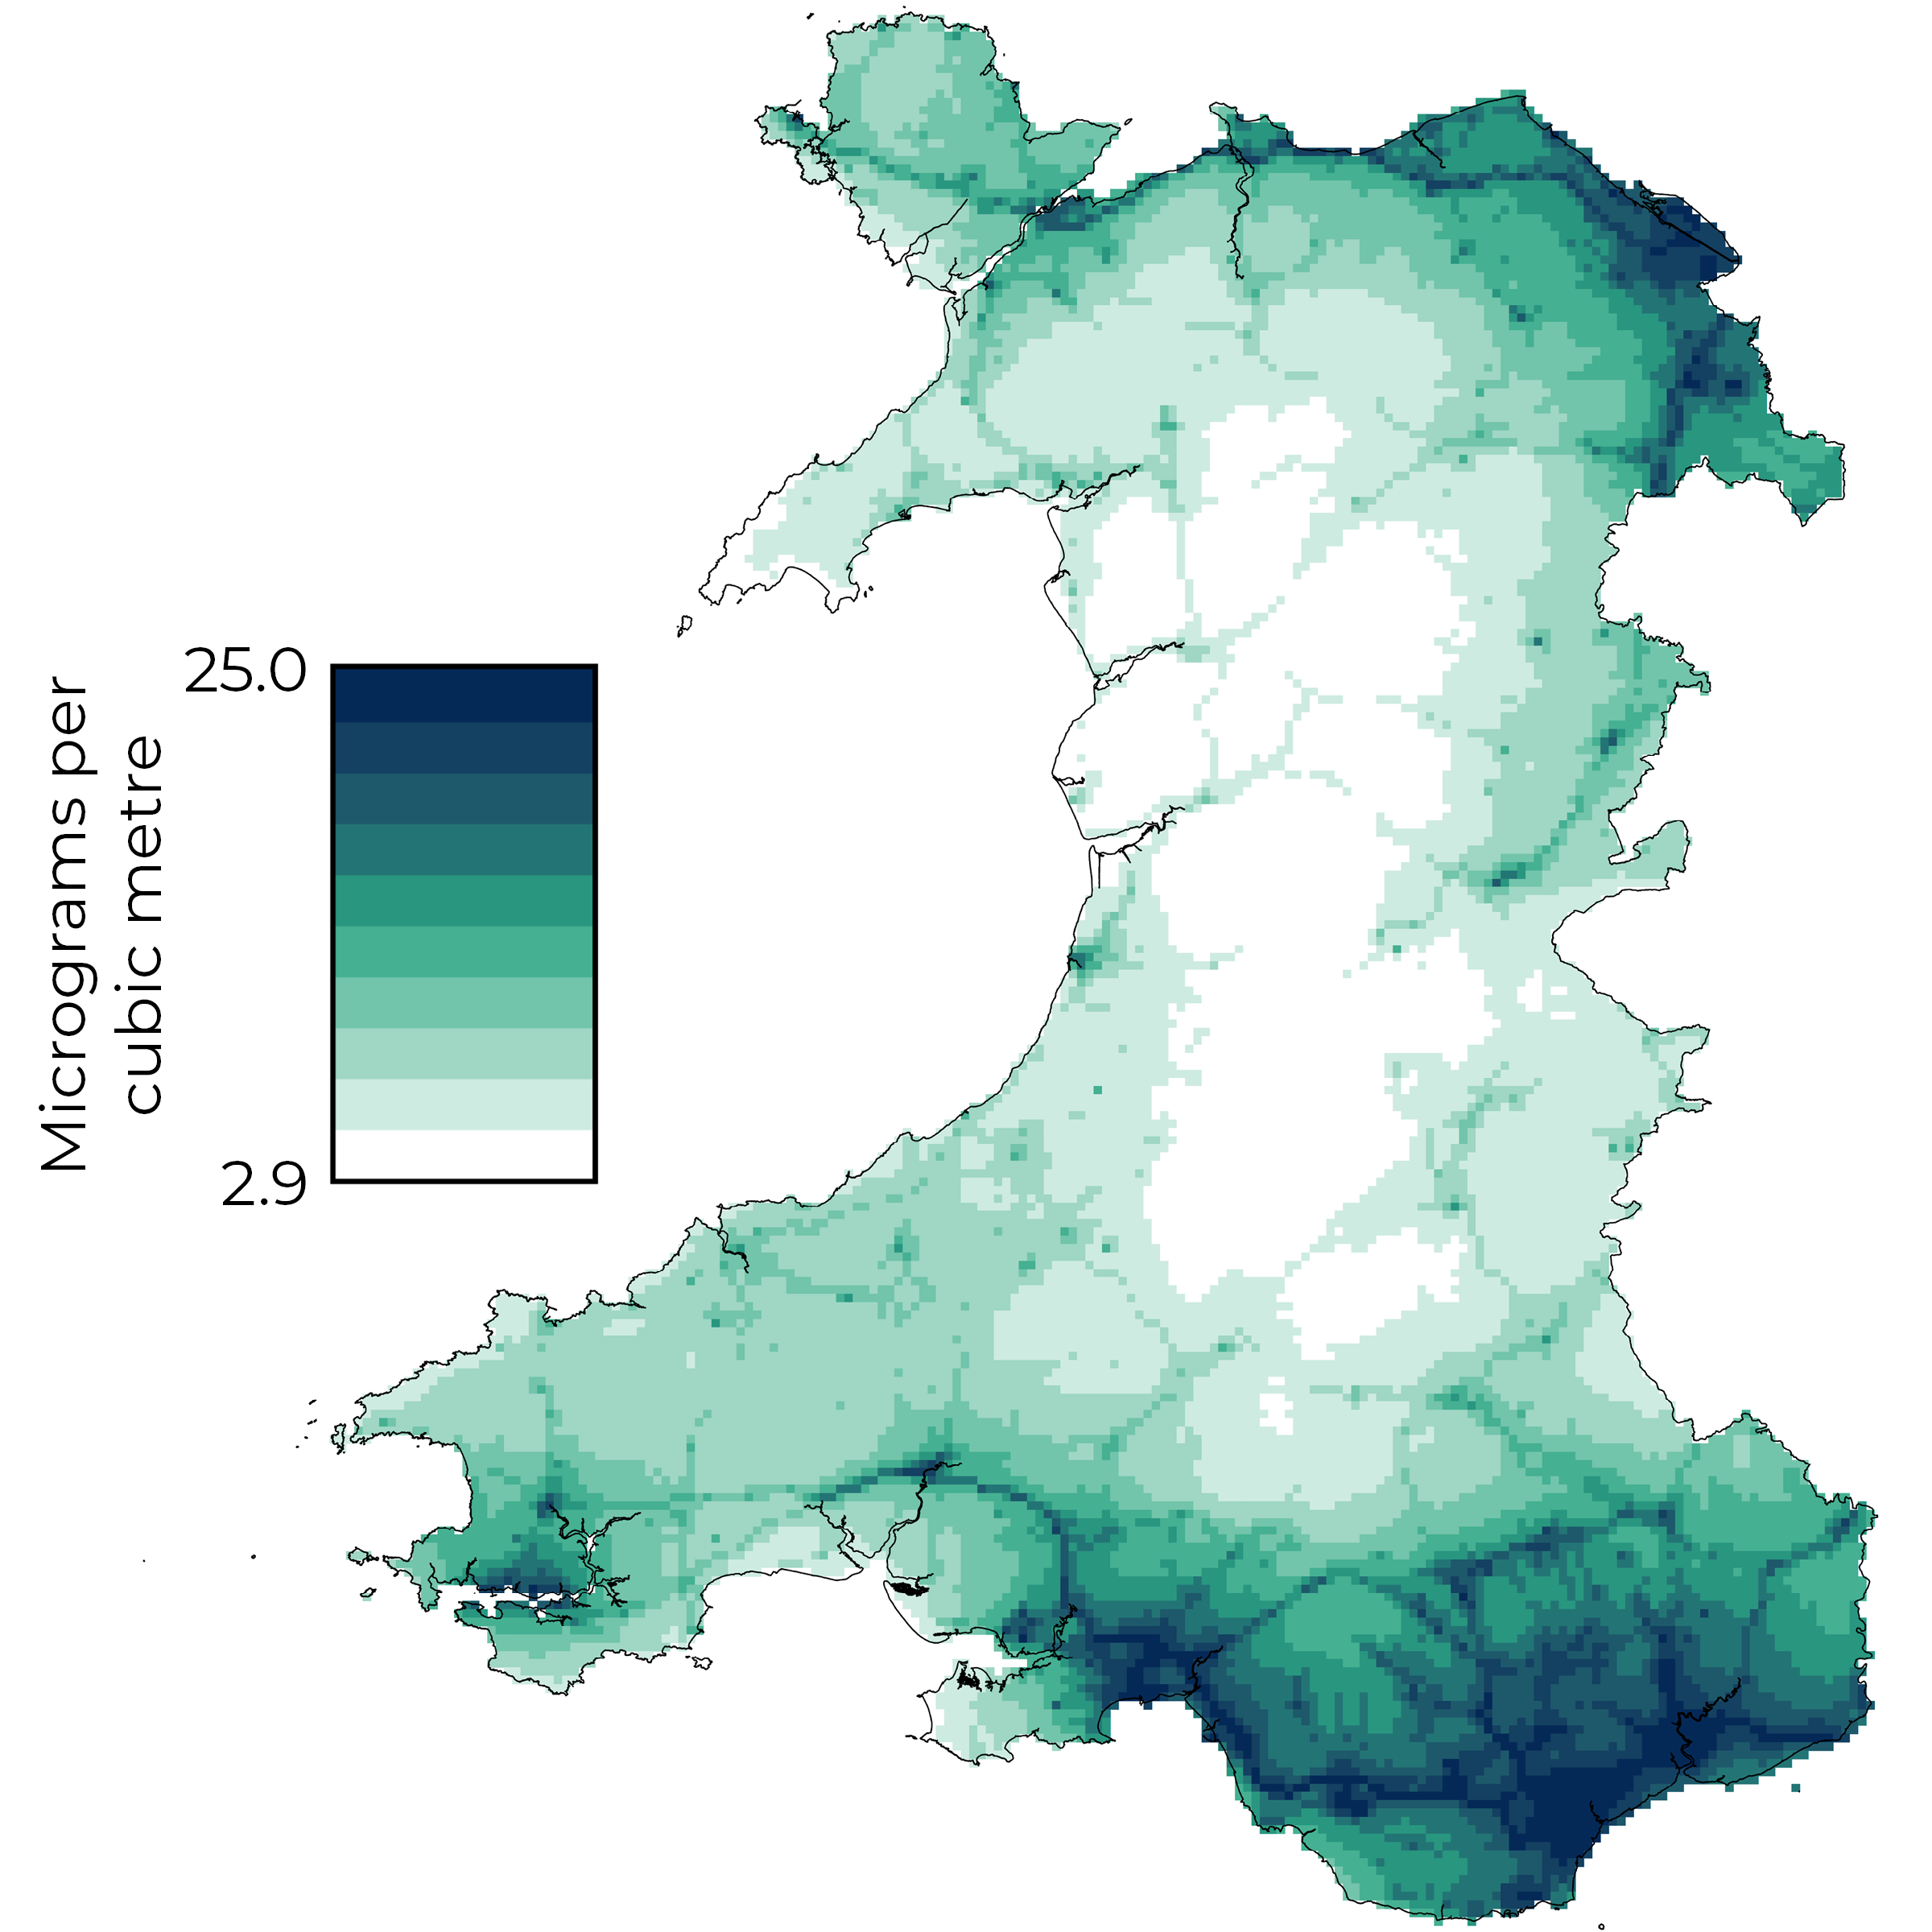 A map of Wales with colour scale showing the annual mean concentration of NO2 ranging from 2.9 to 25.0 micrograms per cubic metre. Similar to PM10 and PM2.5, the lowest concentrations are in mid and north-west Wales and the highest are in south-east and north-east Wales as well as in urban areas and along major roads. In contrast to PM10 and PM2.5, NO2 is much more localised and decreases to relatively much lower concentrations in rural areas.